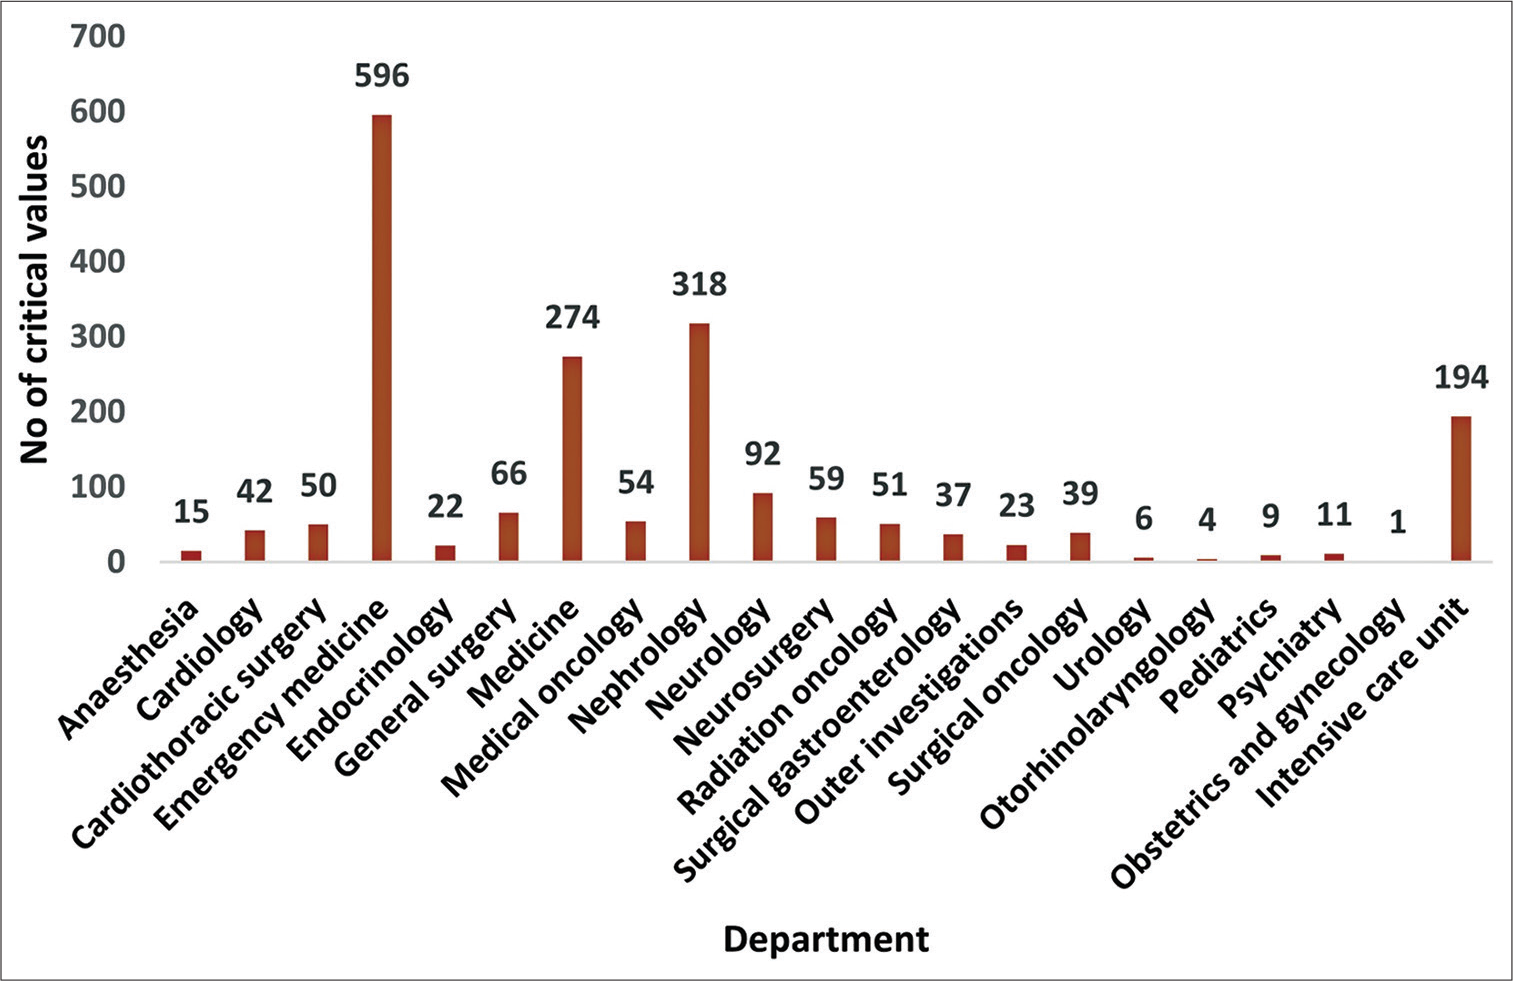 Bar graph with the number of critical values reported by each clinical department during the 6-month study period. The x-axis represents different clinical departments. The y-axis represents the number of critical values reported.